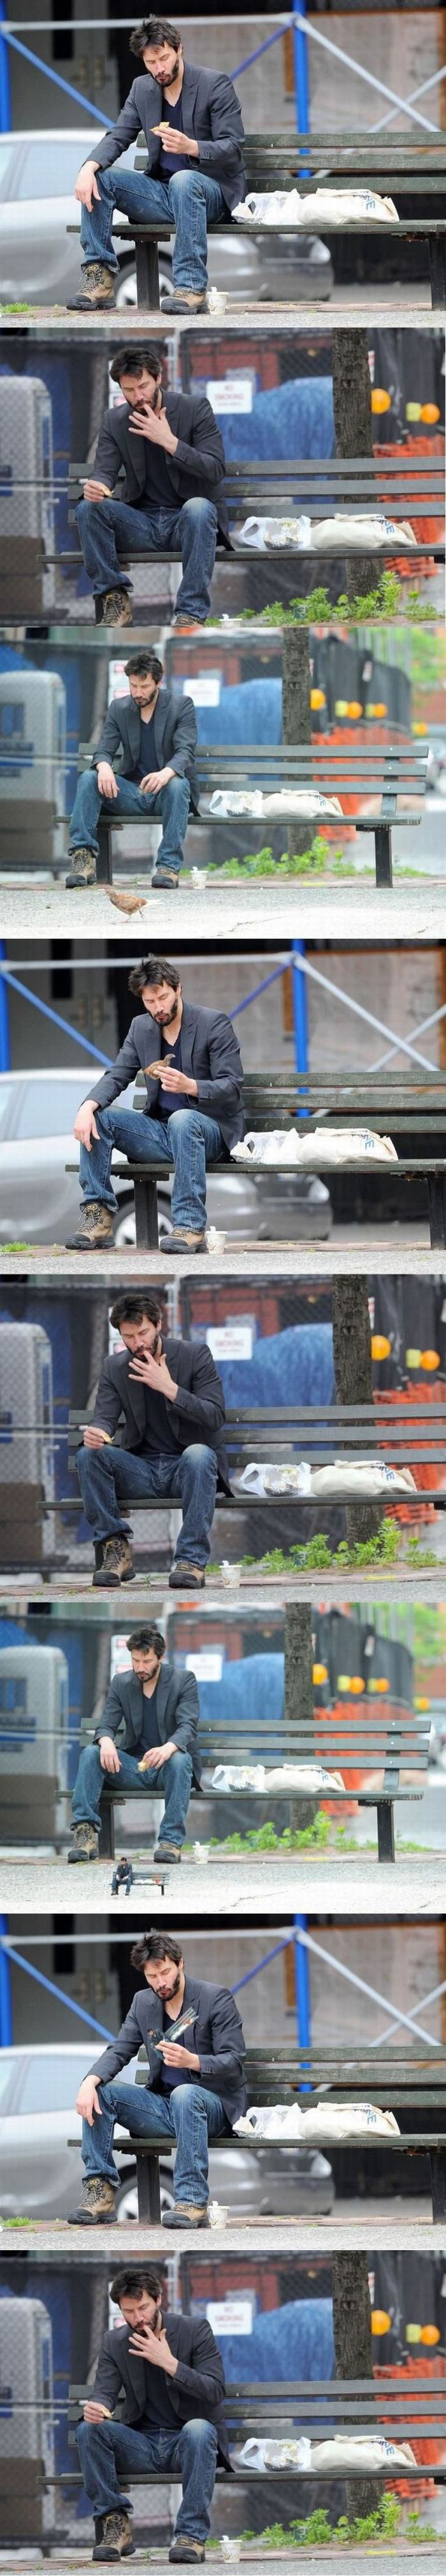 Sad Keanu Reeves is Being Photoshopped (42 pics)